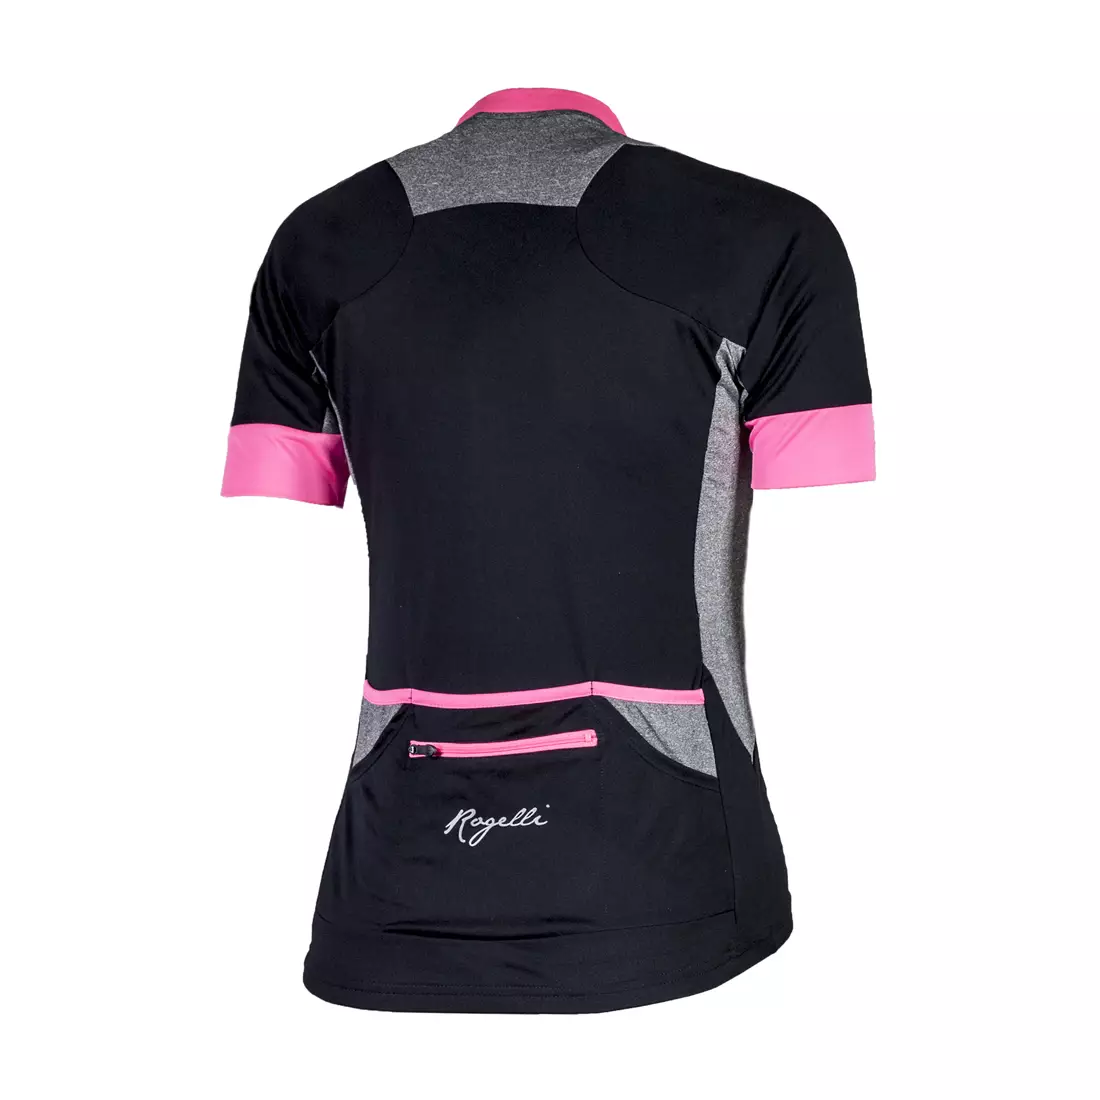 ROGELLI CARLYN - women's cycling jersey 010.026, black and pink